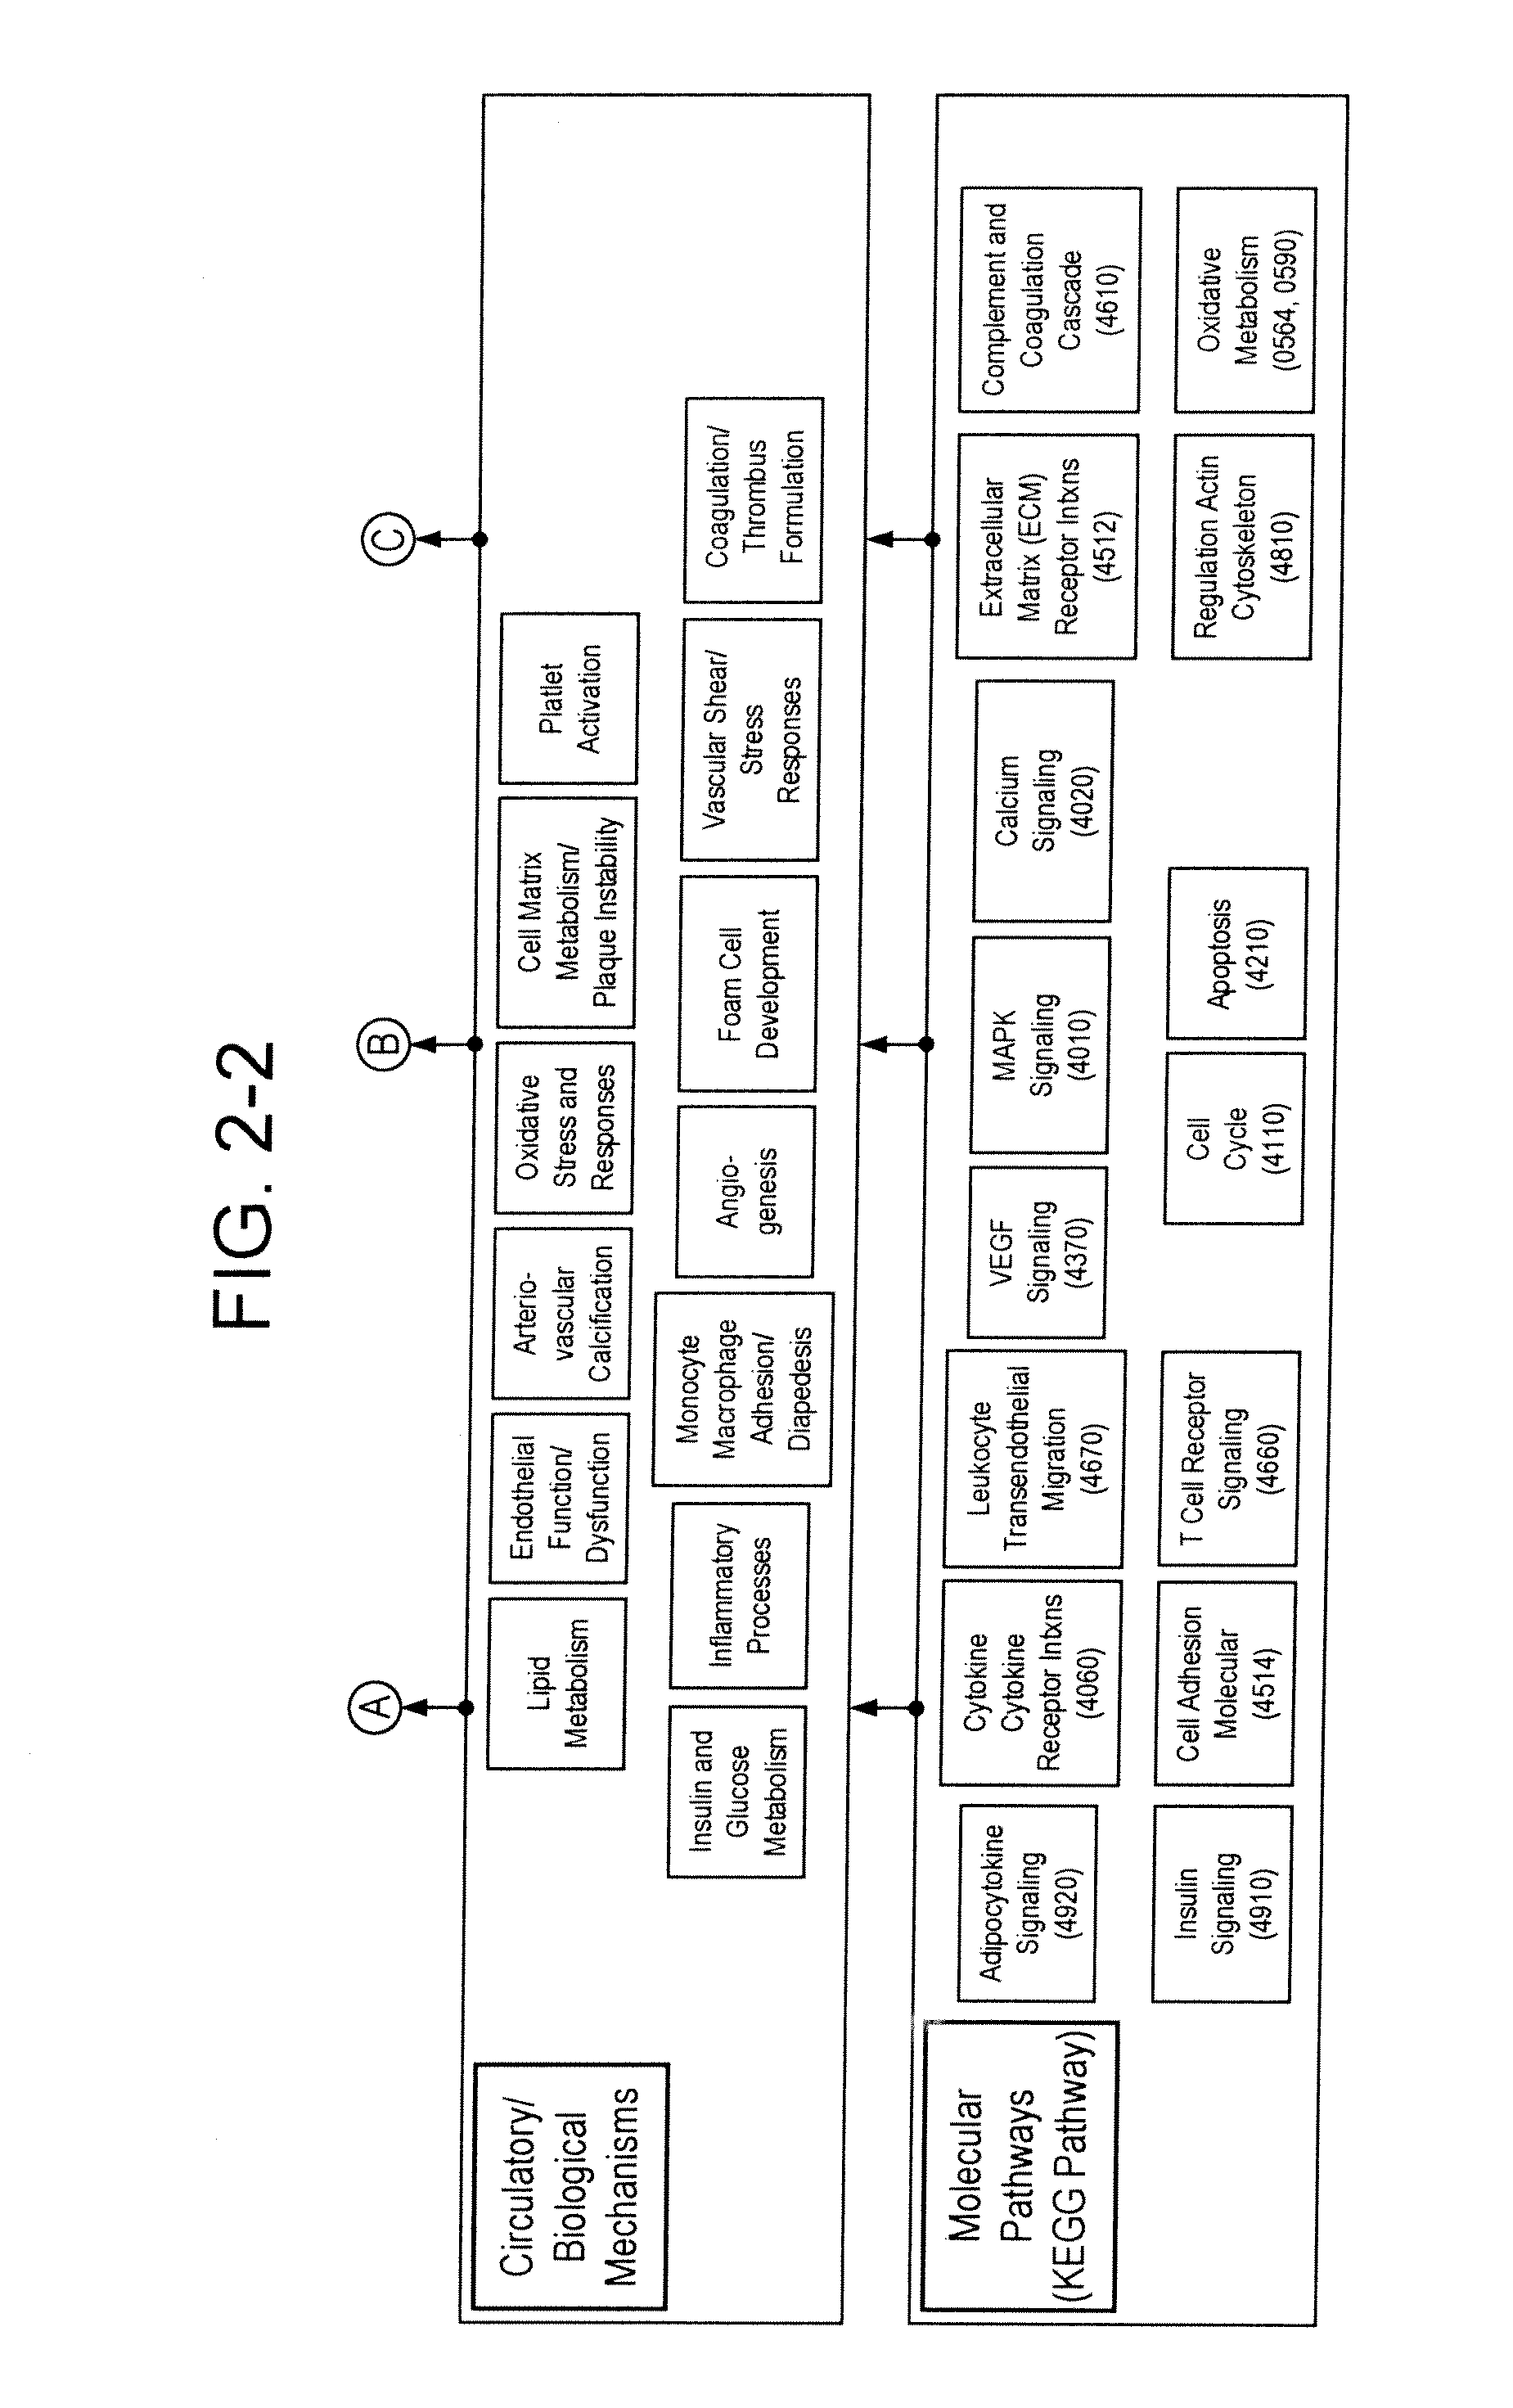 Markers Associate with Arteriovascular Events and Methods of Use Thereof